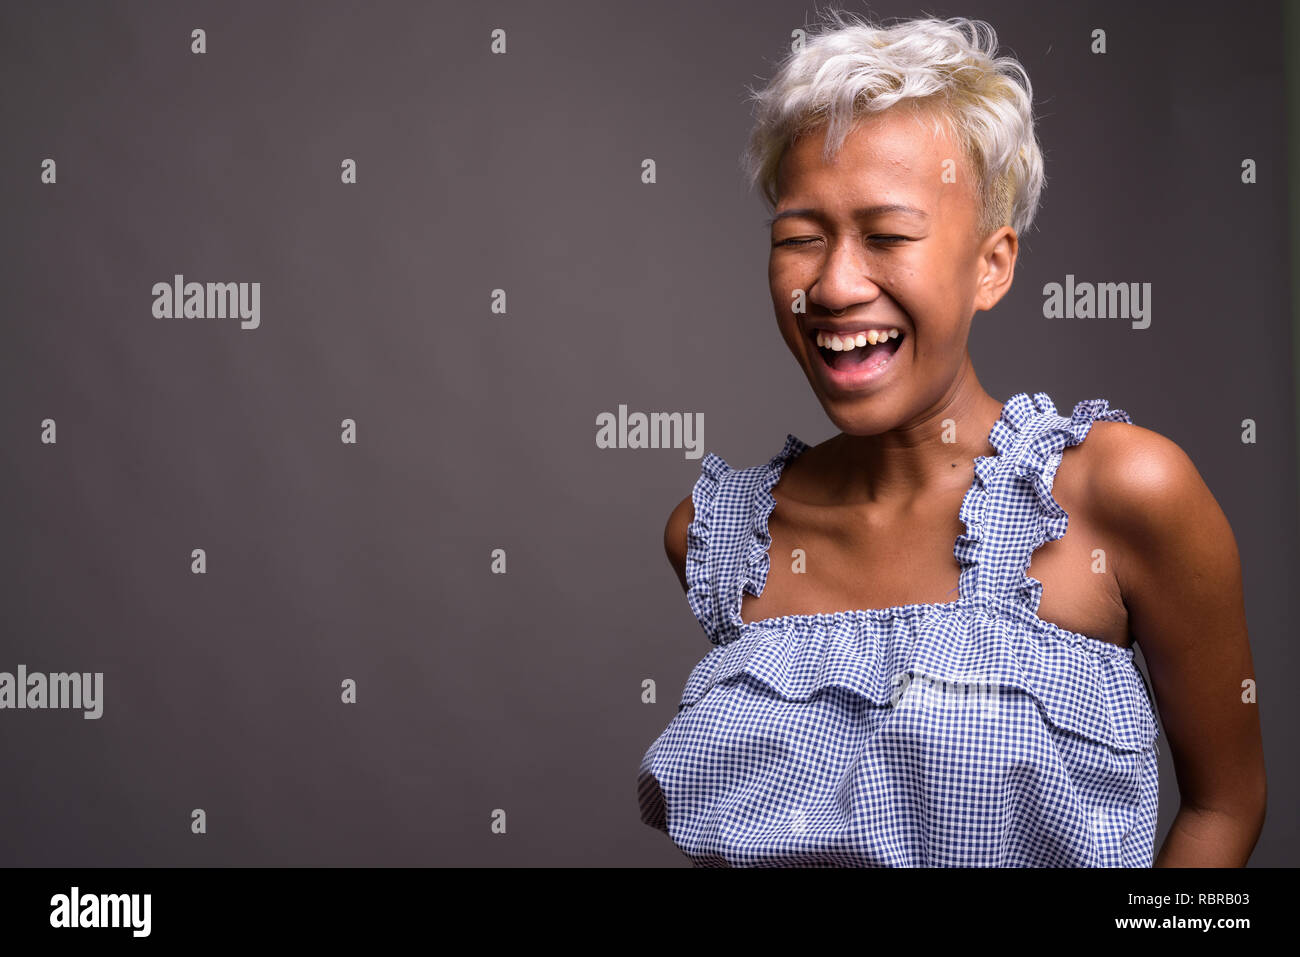 Young beautiful rebellious woman with short hair laughing Stock Photo